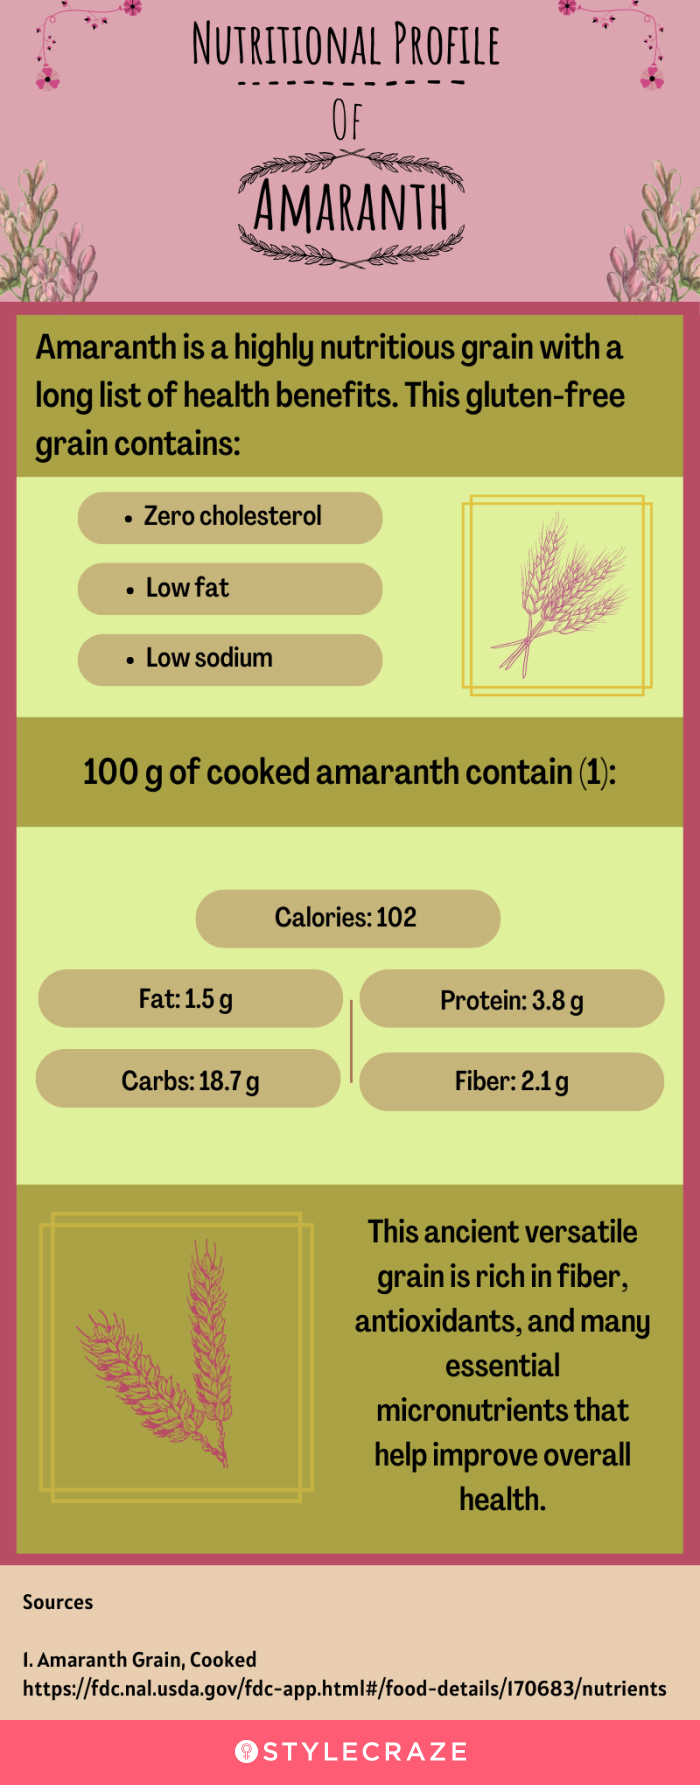 15 Amazing Benefits Of Amaranth, Nutrition, And Side Effects